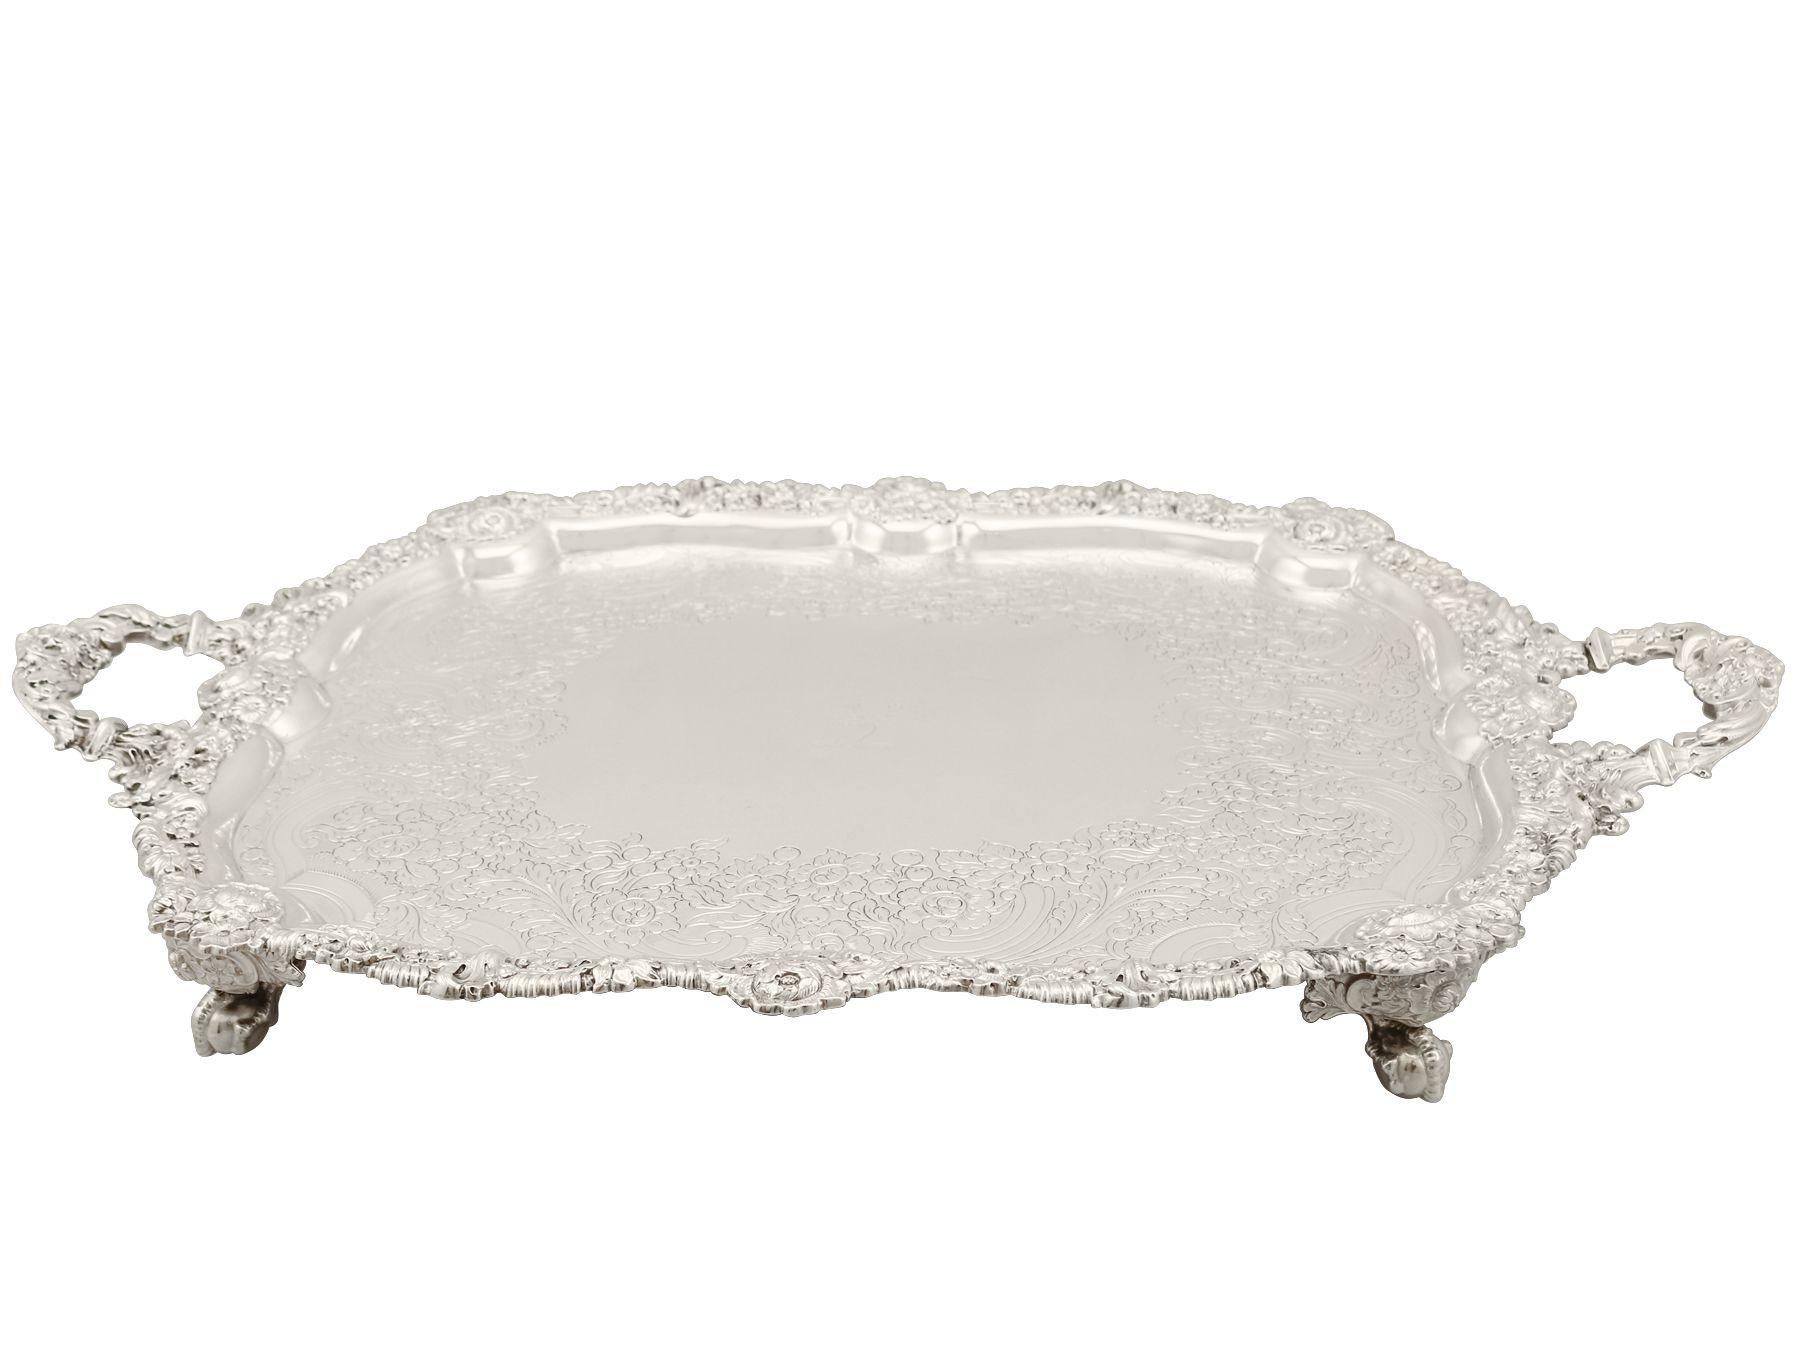 A magnificent, fine and impressive antique George IV English sterling silver tea tray, an addition to our range of silver trays, salvers and plates.

This magnificent antique George IV sterling silver tea tray has a rectangular shaped form with